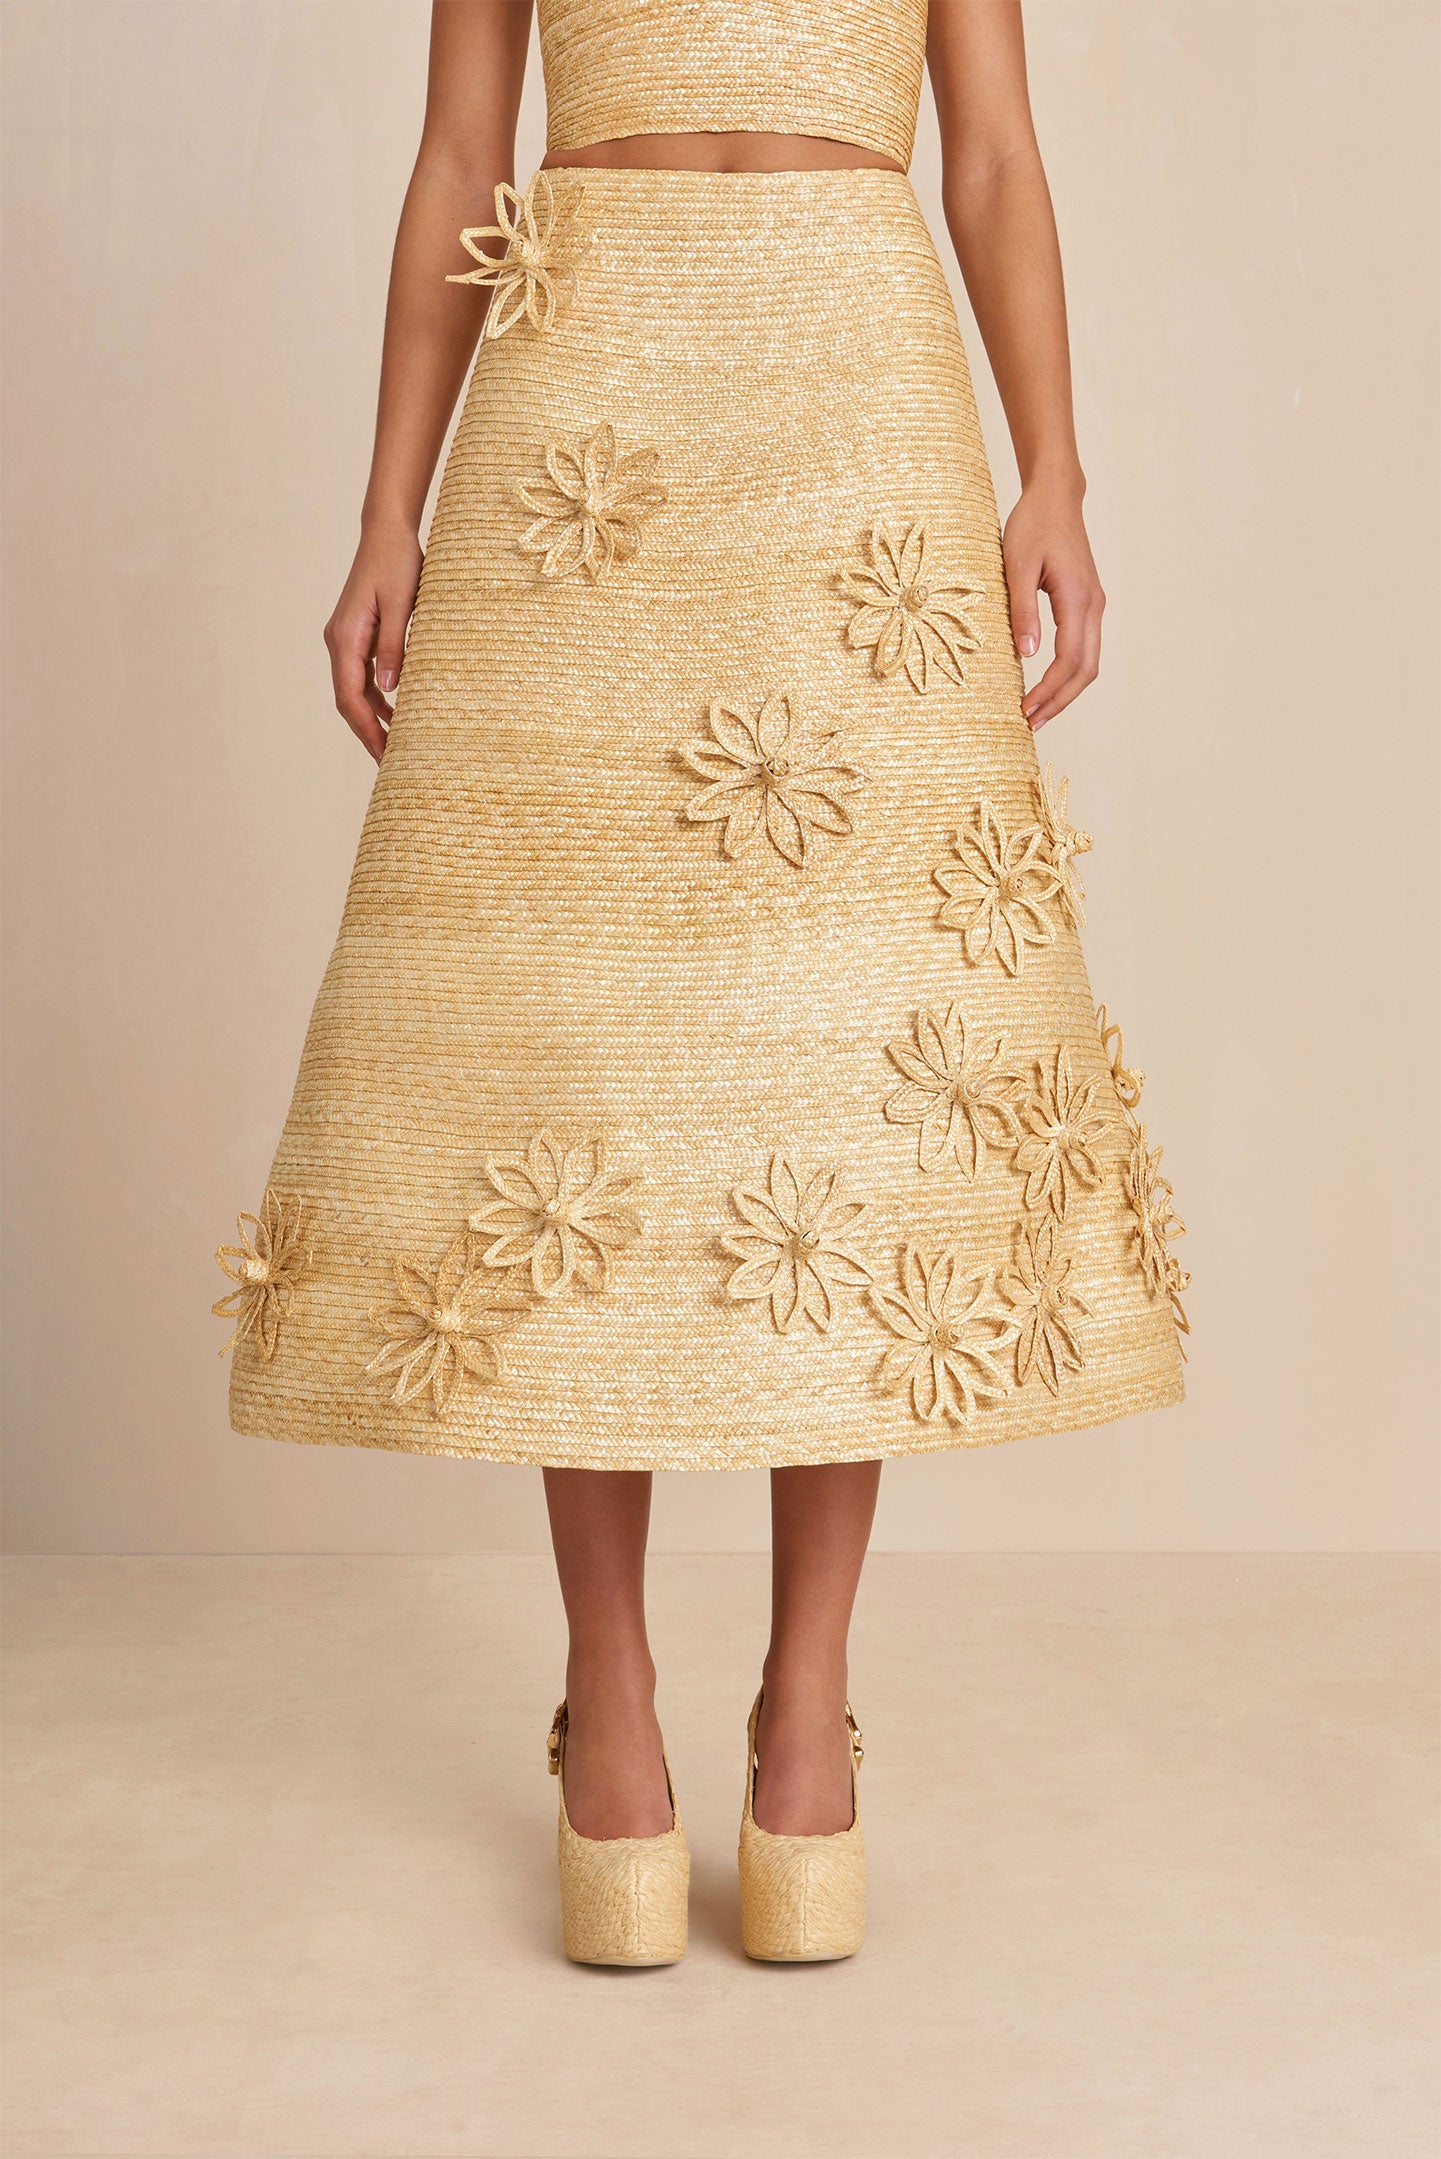 OPHILE SKIRT - NATURAL